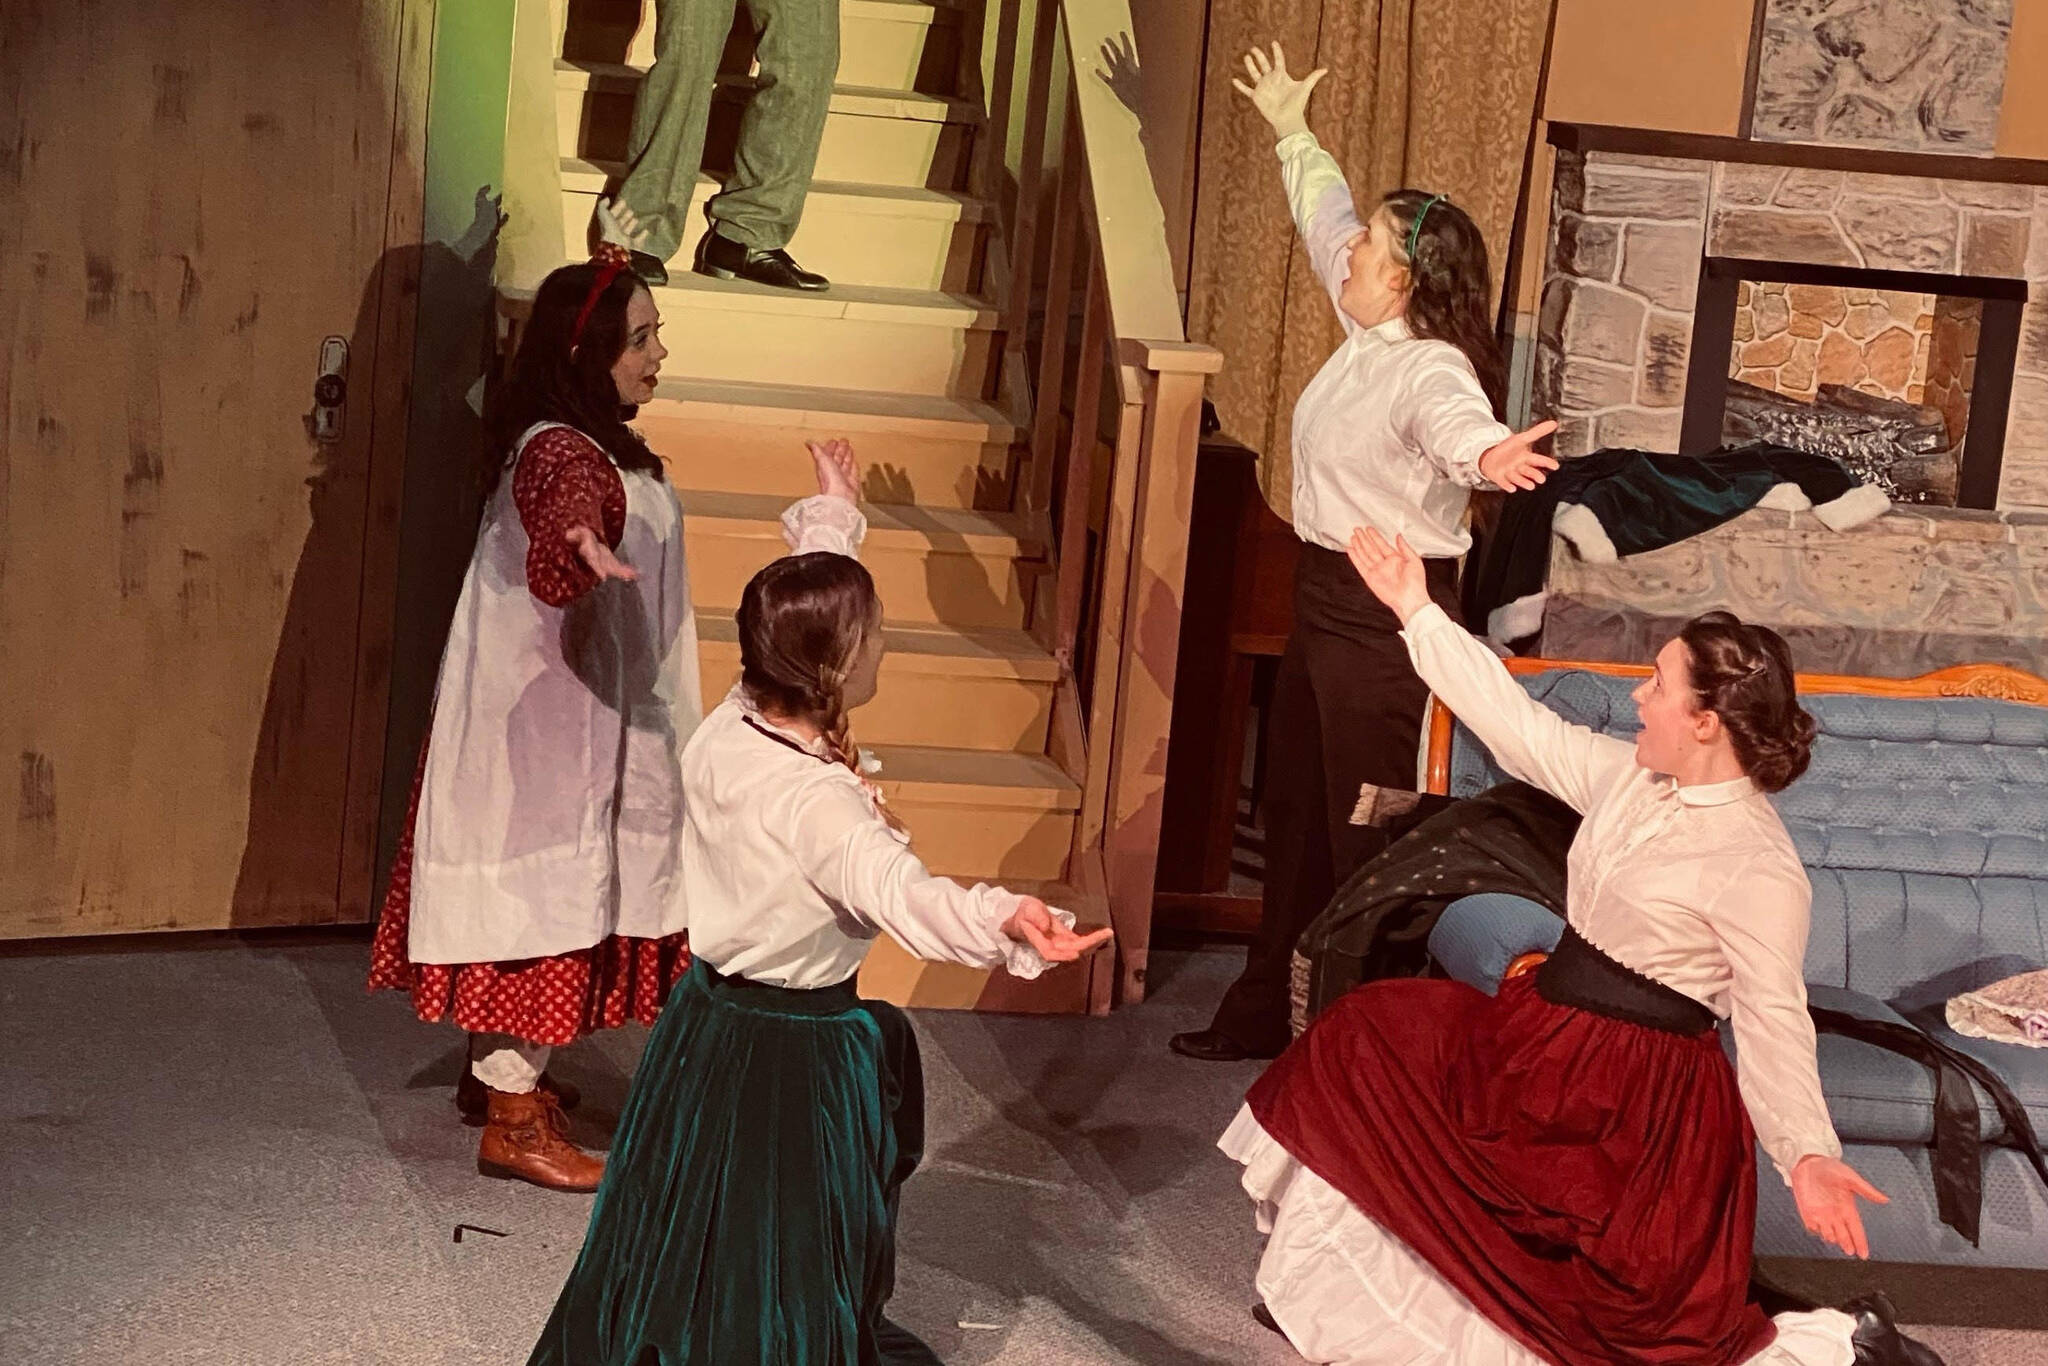 Alyeska Krull, Jayni Parish, Braeden Garrett, Brittany Gilman and Selia Butler act onstage as their characters the March sisters and Theodore “Laurie” Lawrence in the Kenai Performers’ production of “Little Women” in May 2021. (Photo provided)